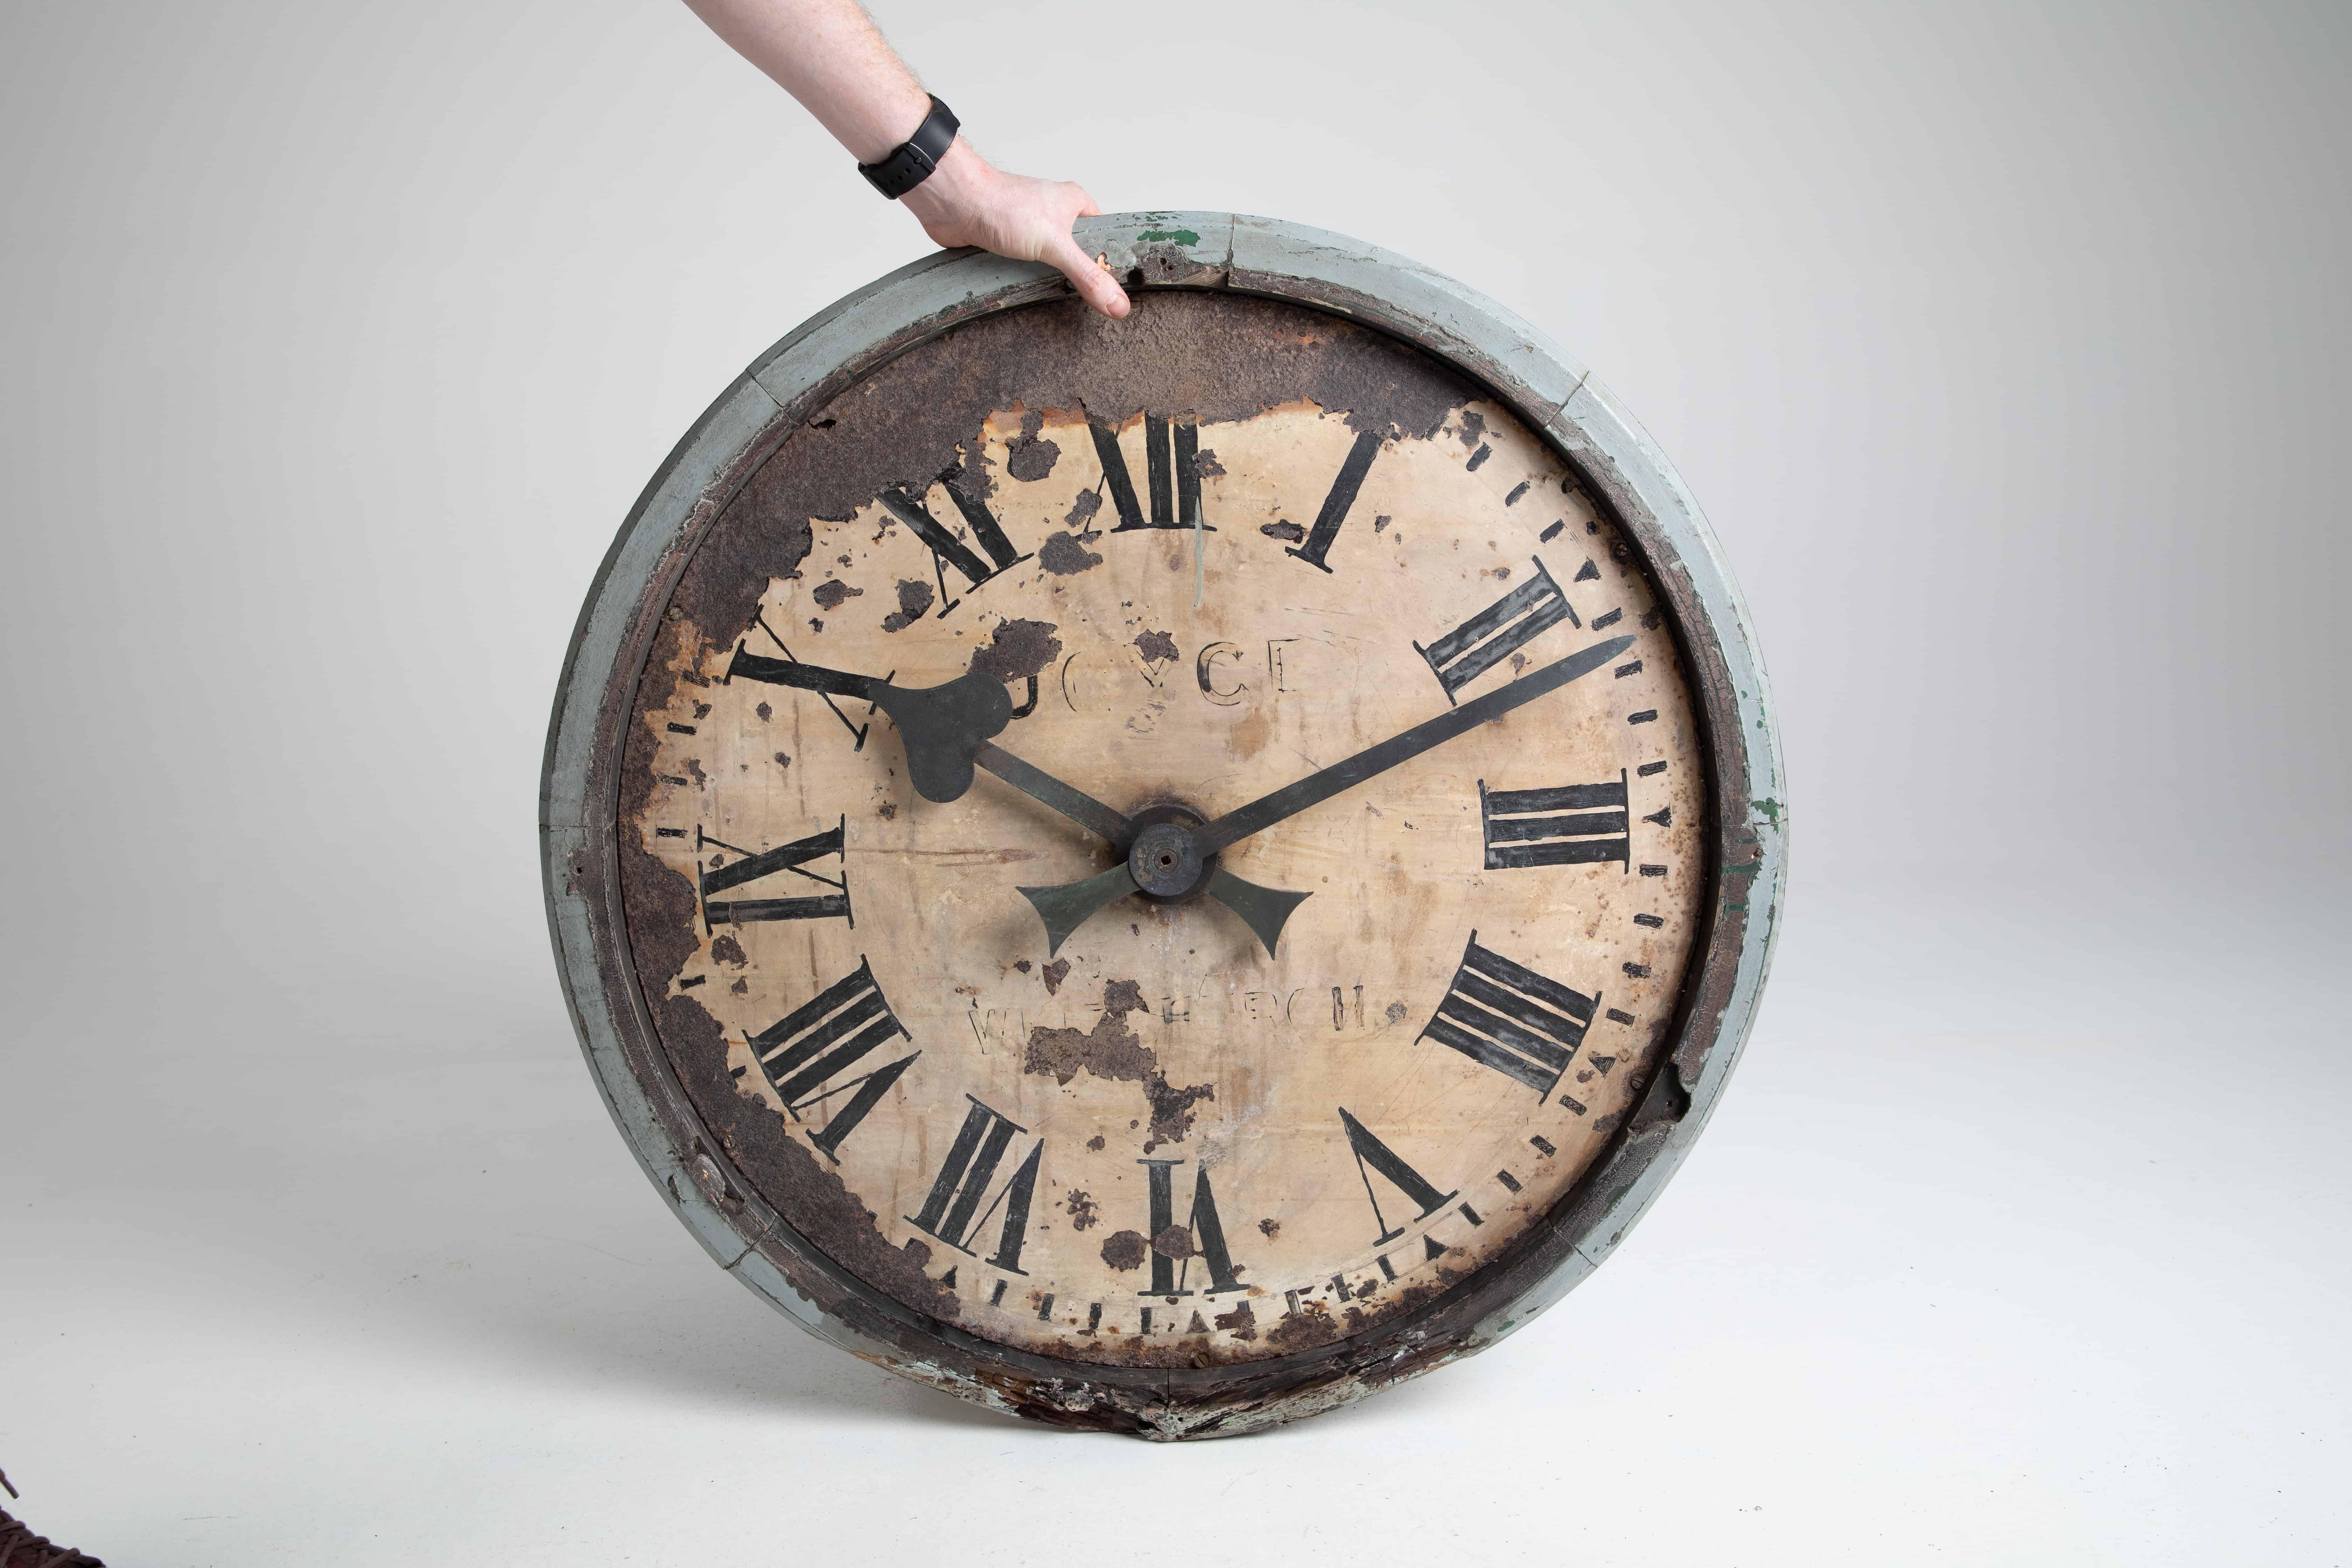 A scarcely found tower clock made in England by Joyce of Whitchurch. c.1880

A rare find, and in an incredibly time worn distressed appearance. Heavy duty steel dial with numerous stains, losses, cracks and chips - but critically all sound, secure